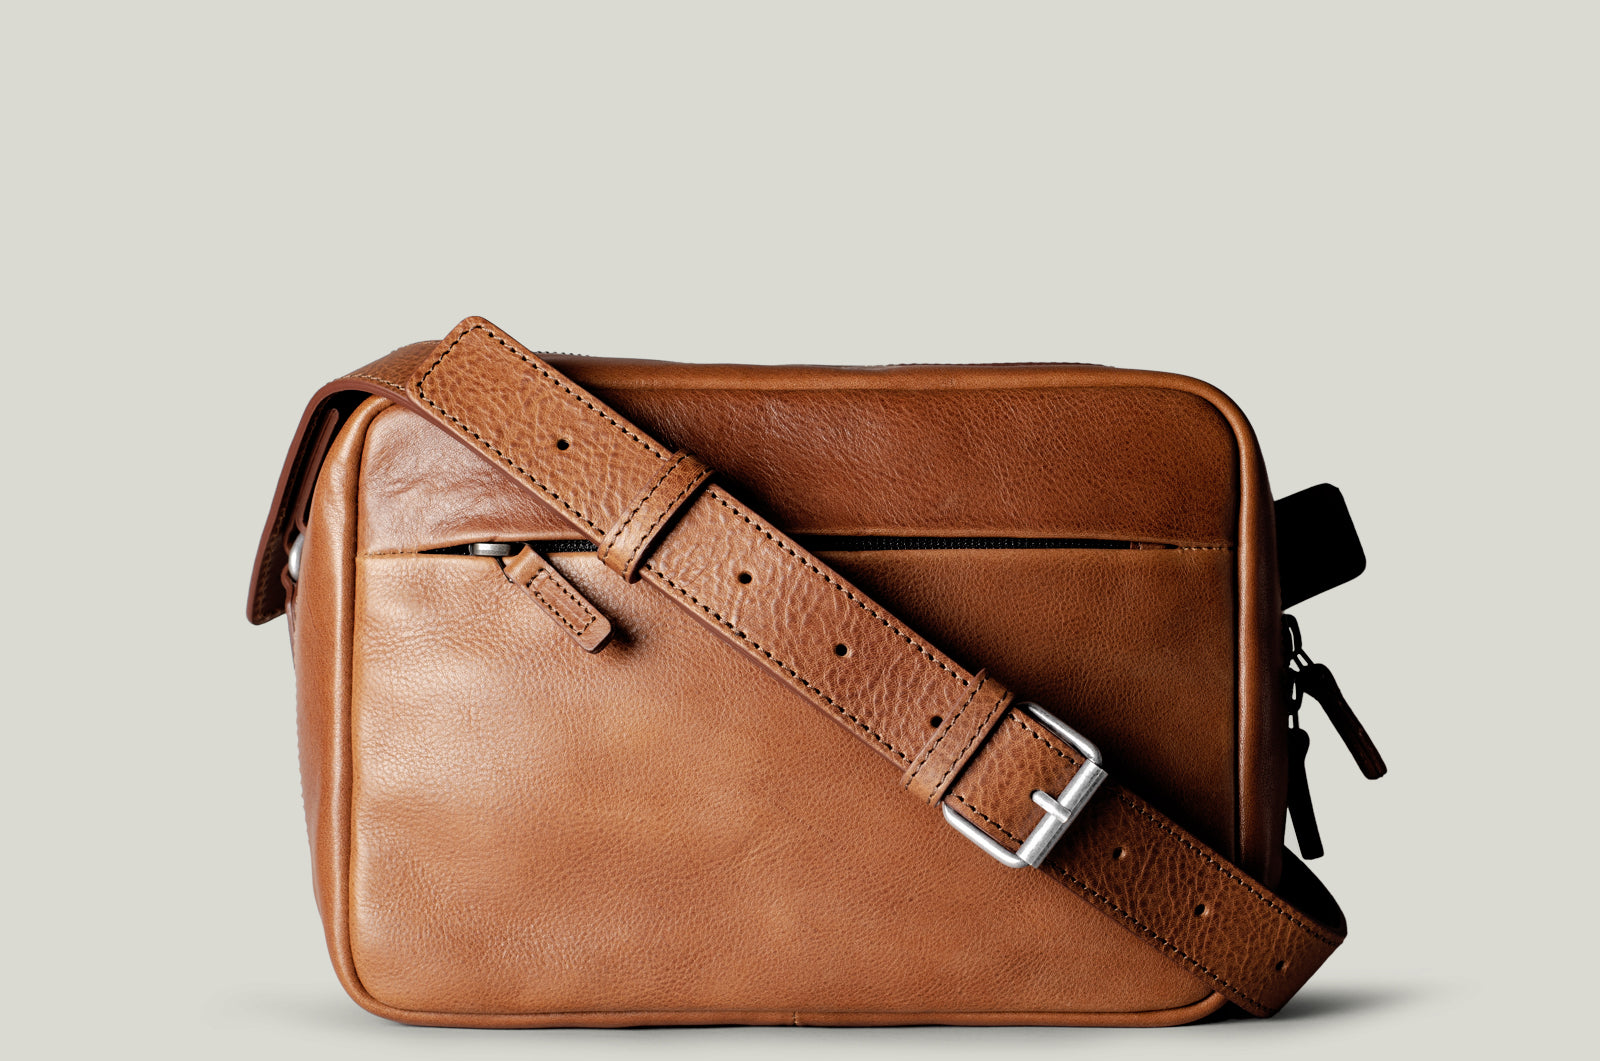 All-Rounder Pack . Classic Leather – hardgraft